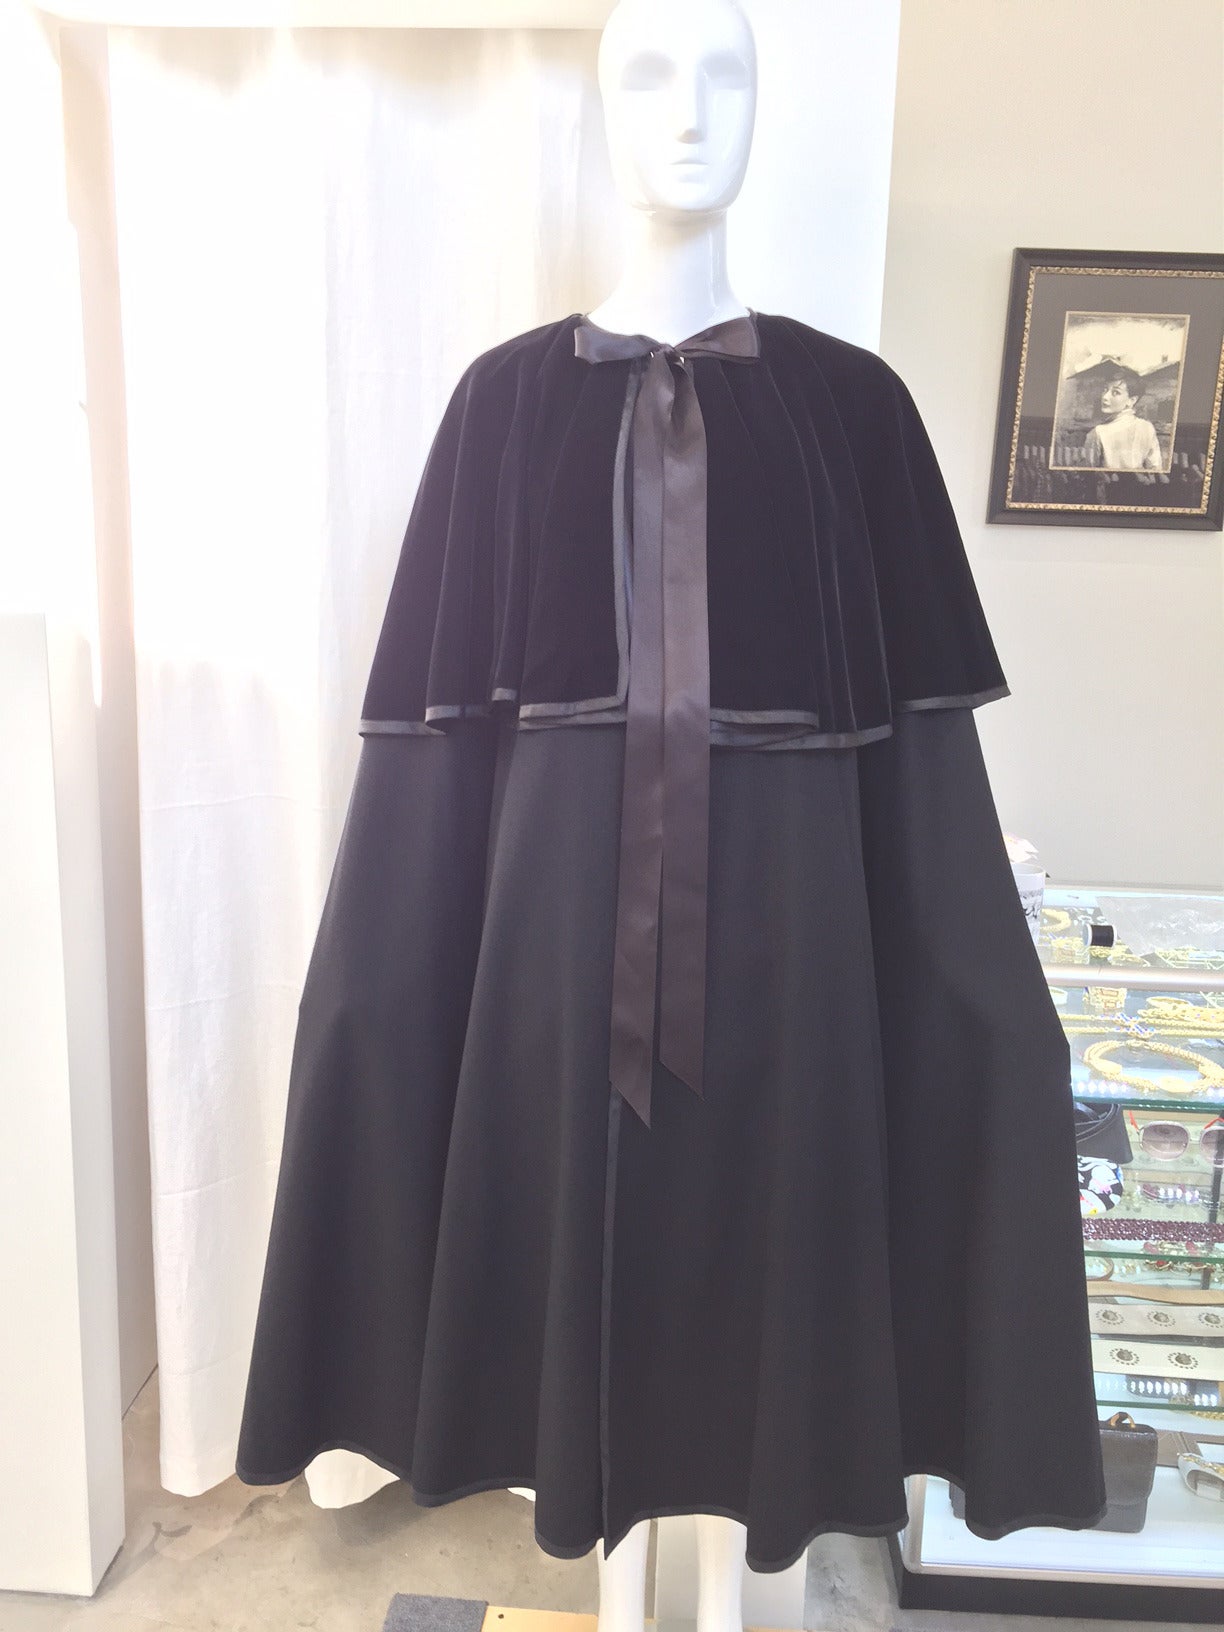 70s SAINT LAURENT black wool and velvet cape with black silk ribbon.
Condition : Excellent
All size